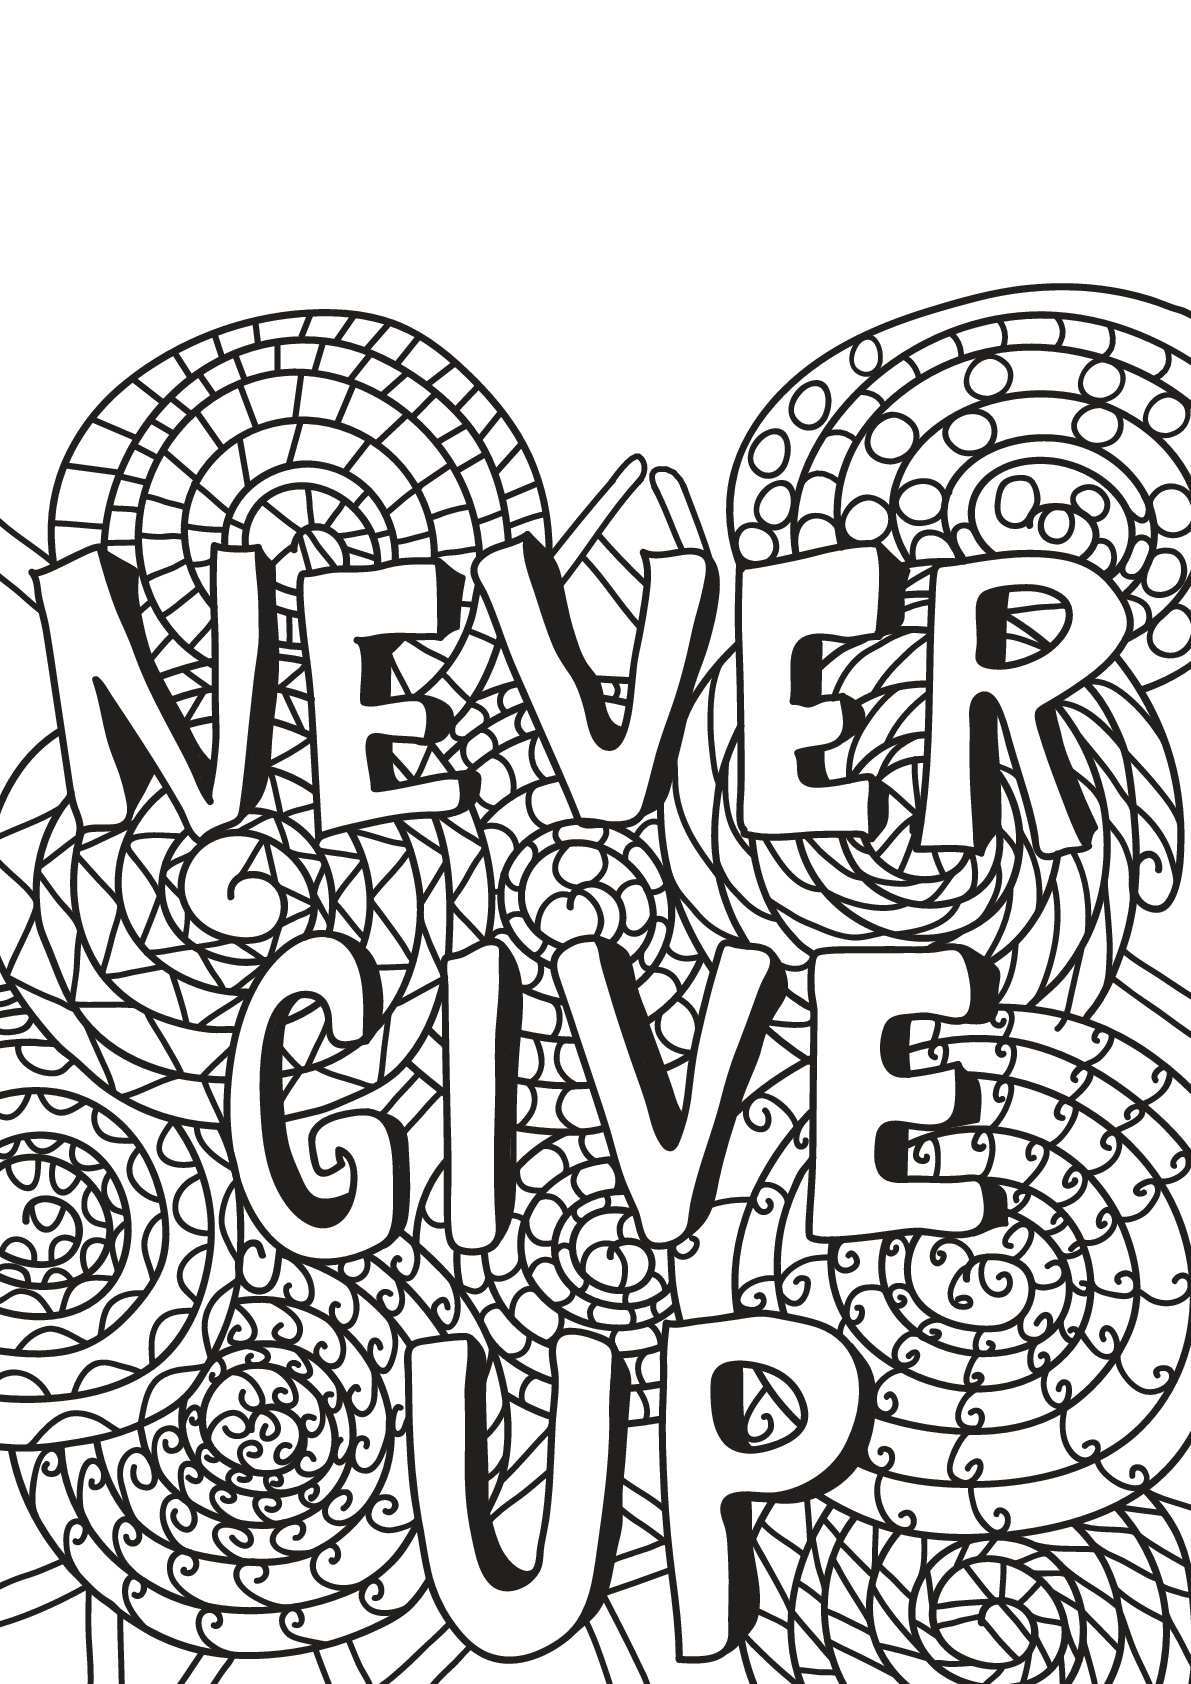 Don't Give Up: Inspirational Quotes Coloring Books: Adult Coloring Books to Inspire You. [Book]